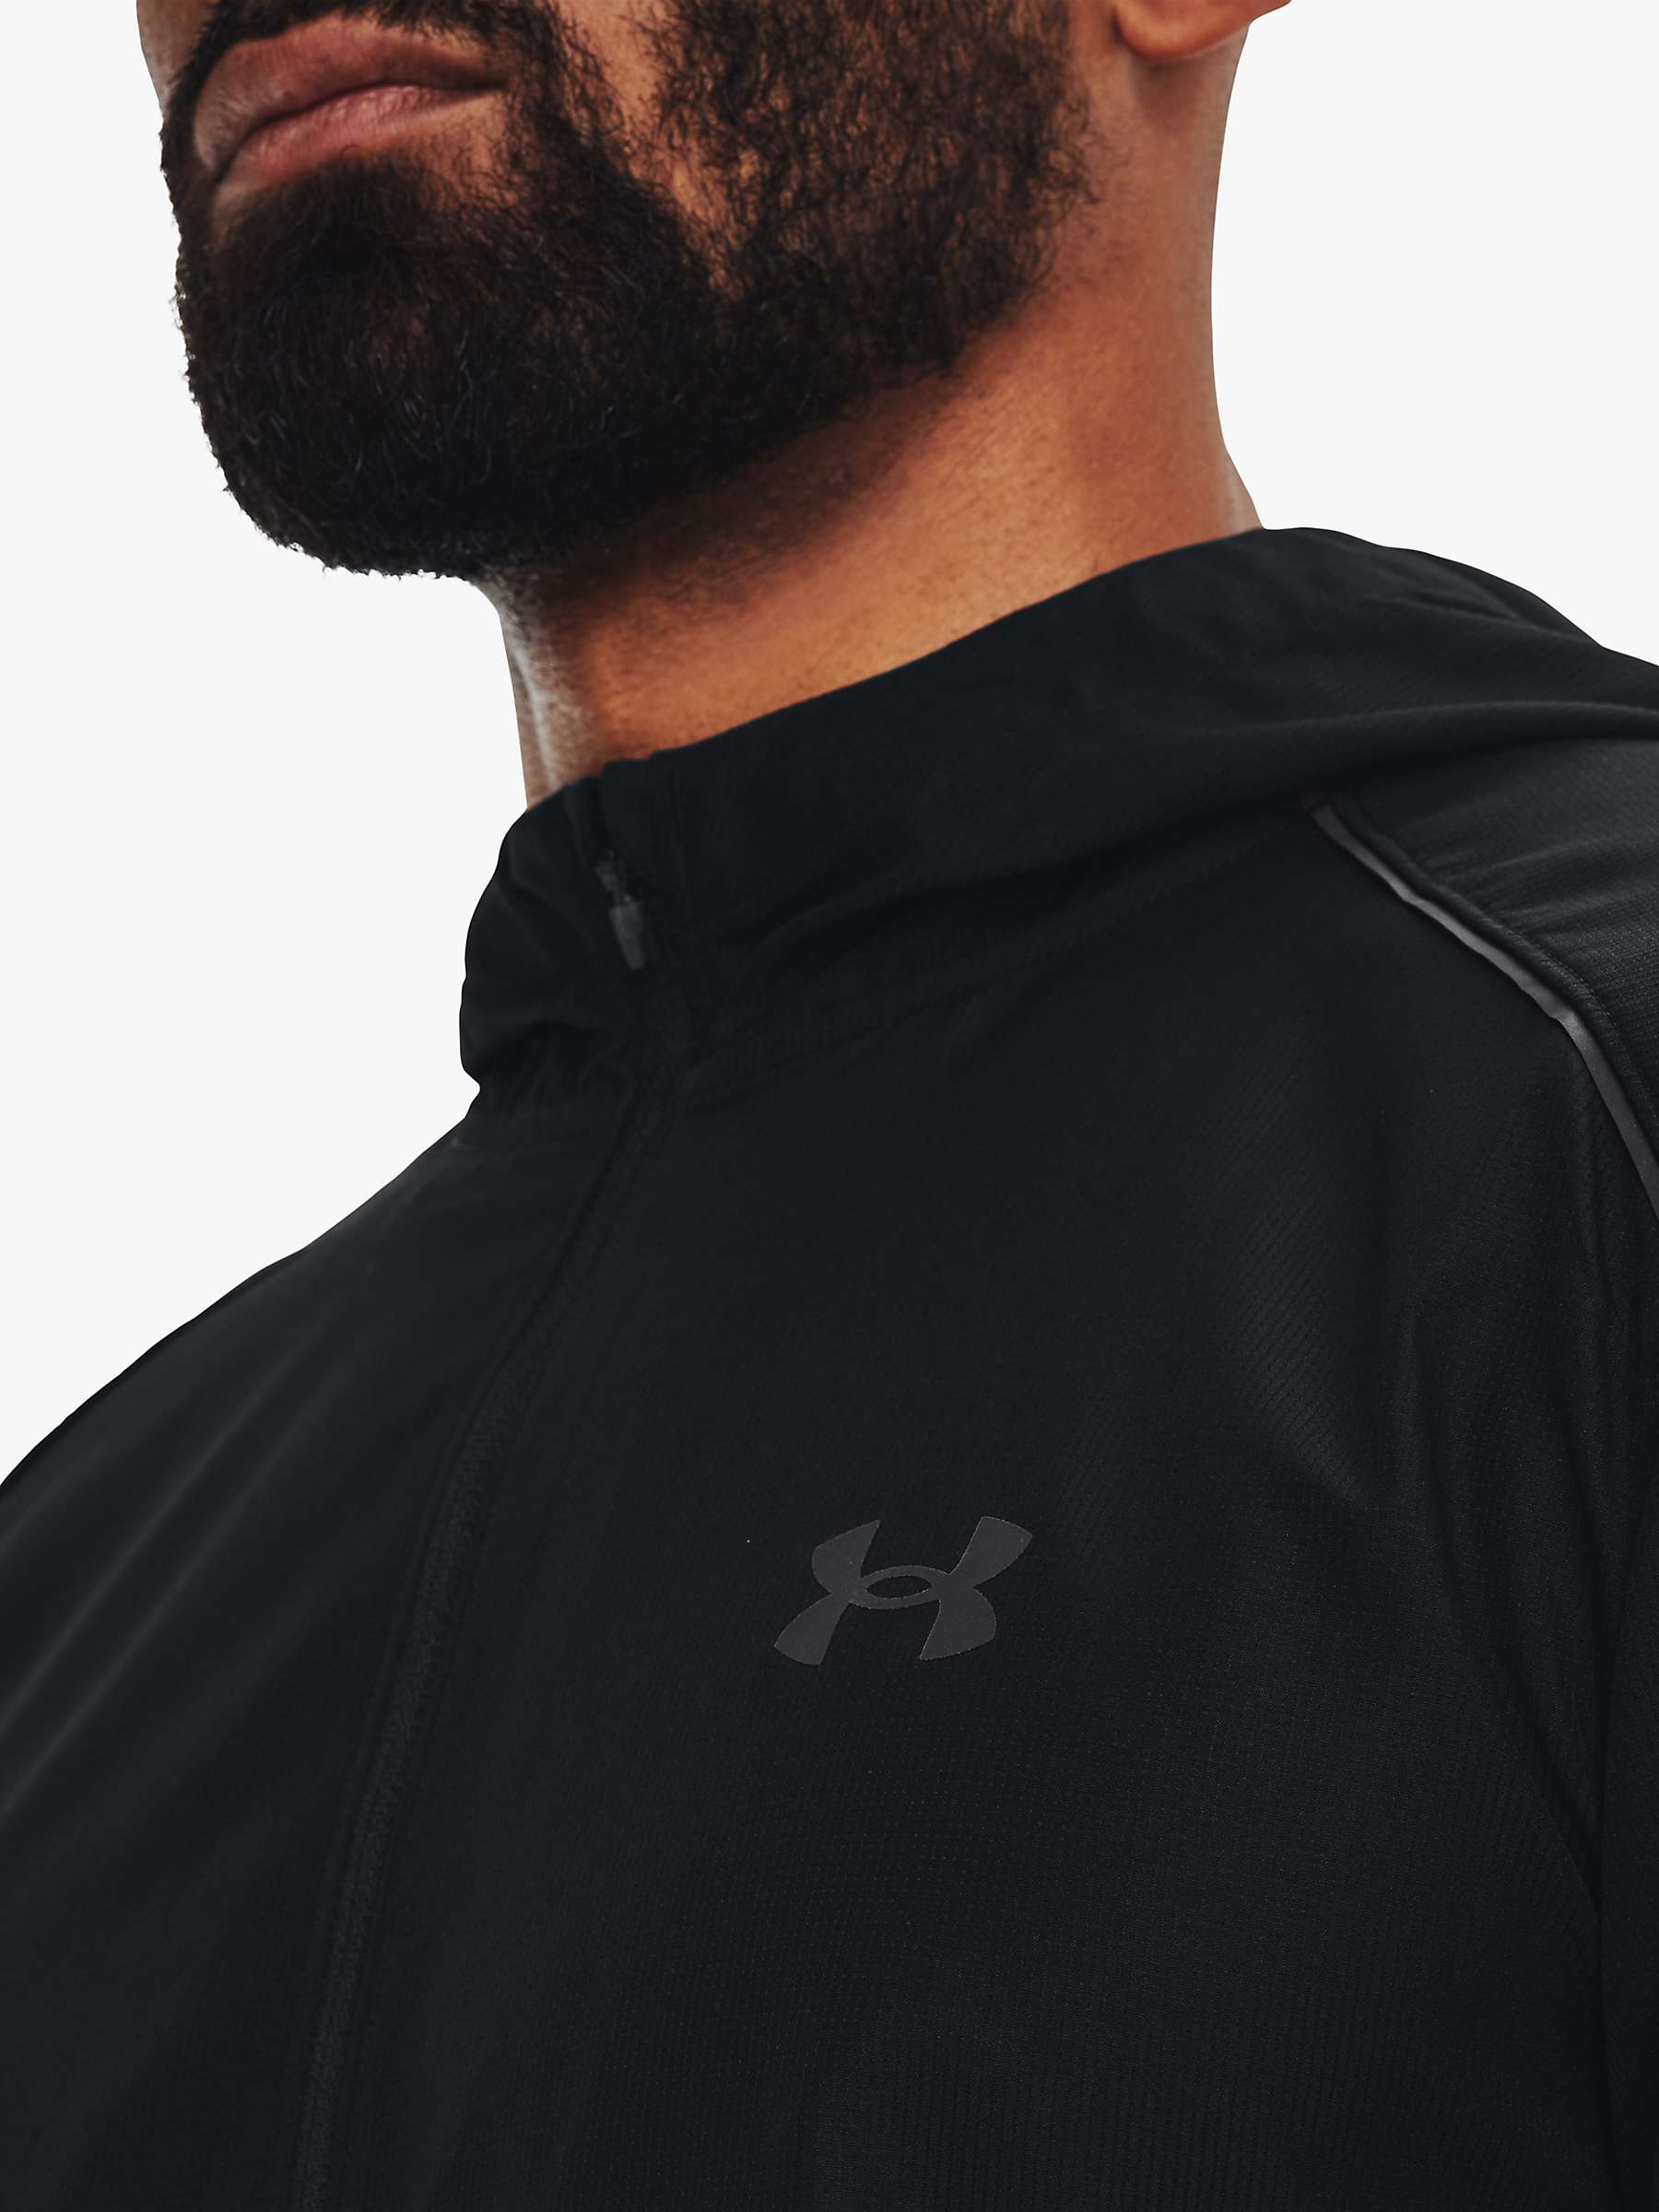 Buy Under Armour Run Anywhere Storm Men's Running Jacket Online at johnlewis.com